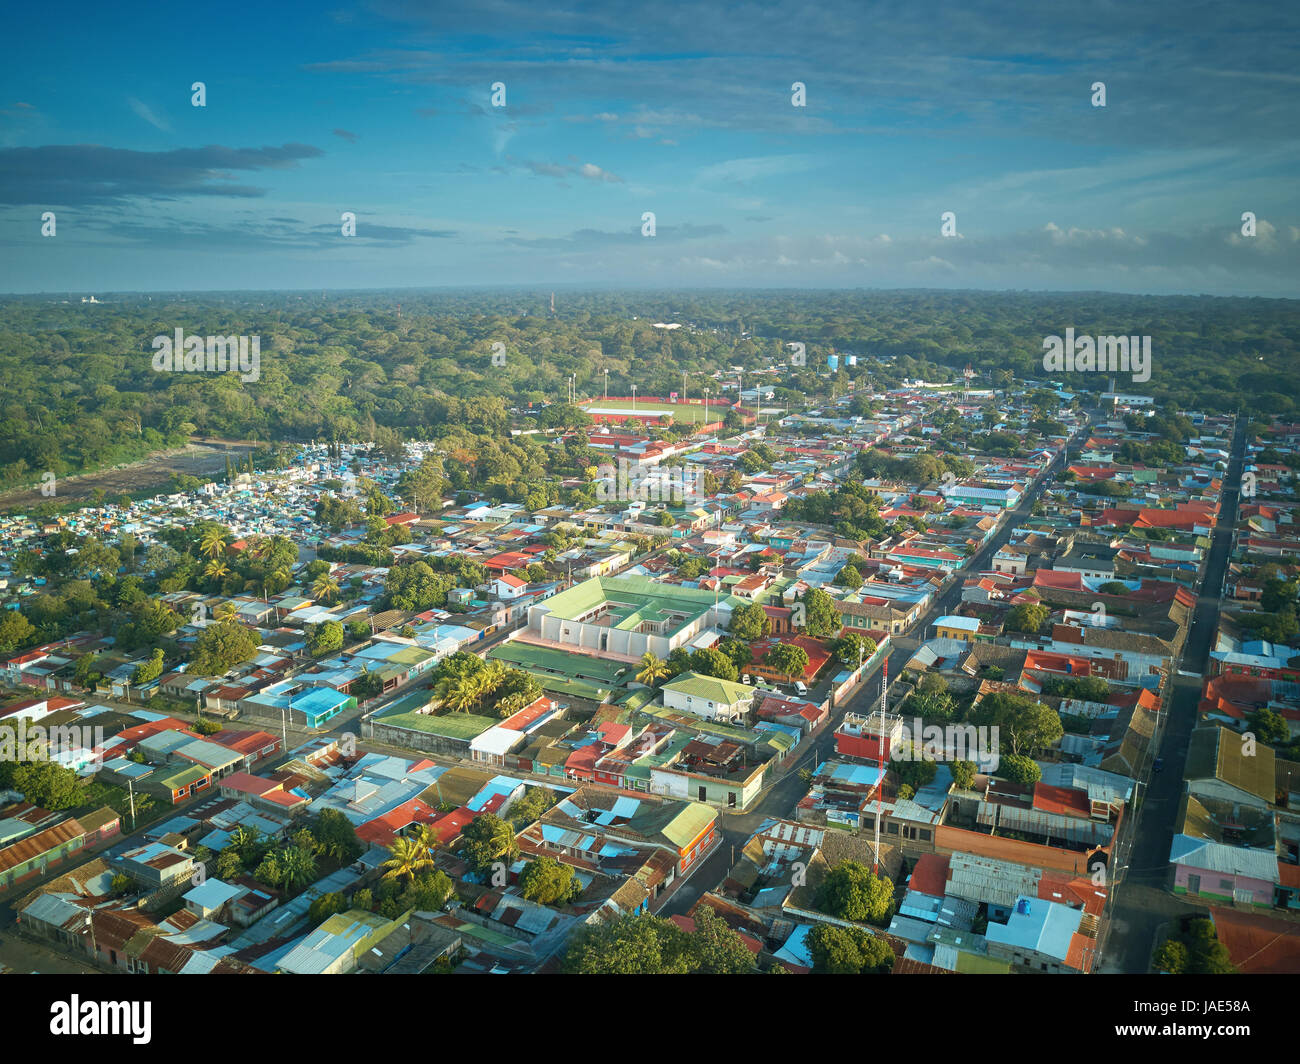 Landscape of small town in Latin America aerial drone view Stock Photo